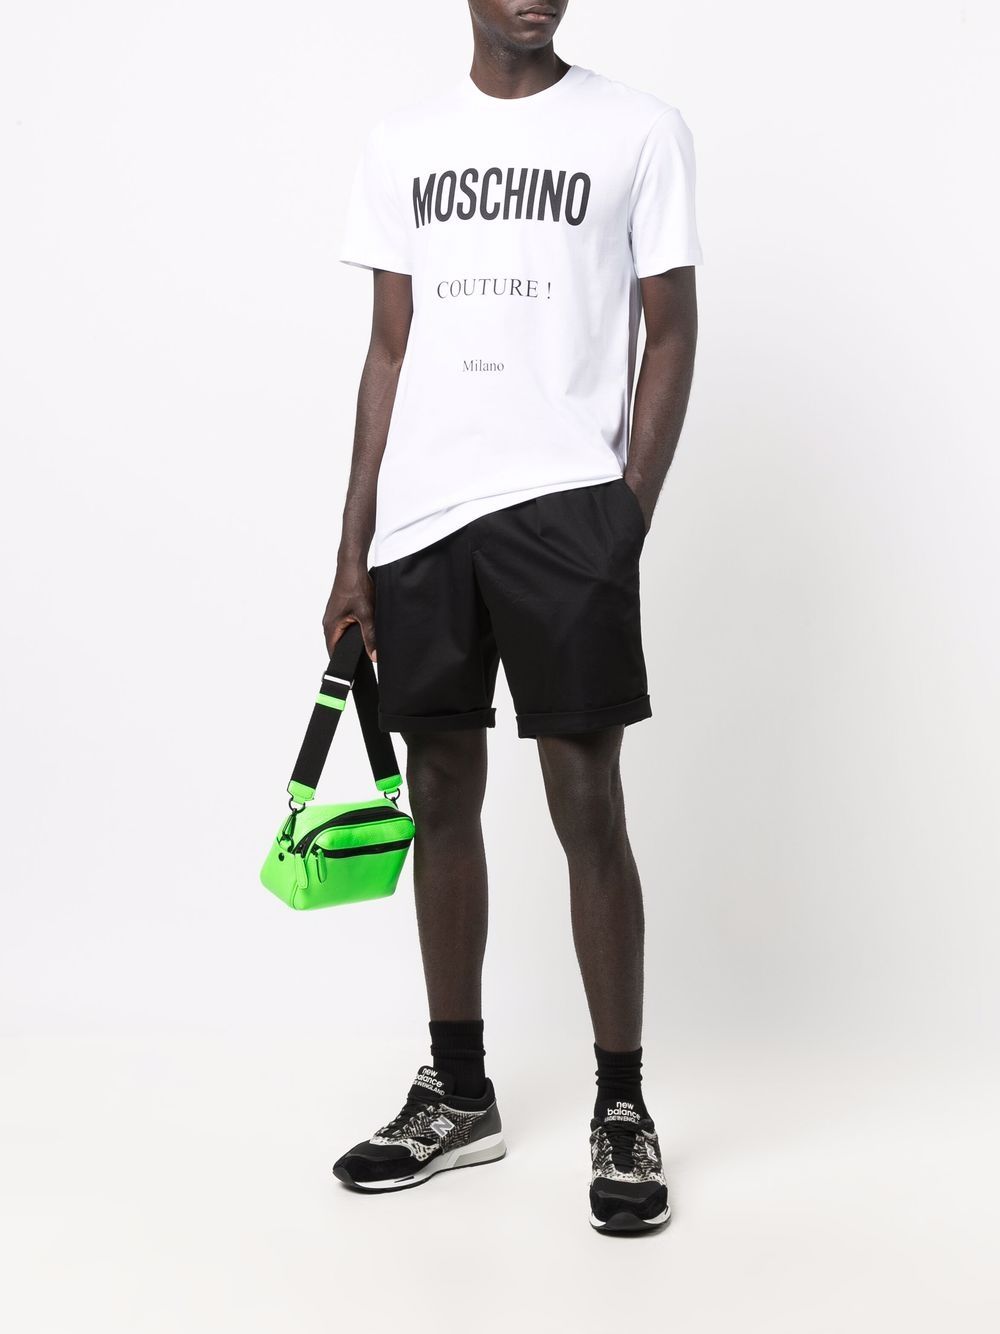 Image 2 of Moschino Couture logo-print T-shirt